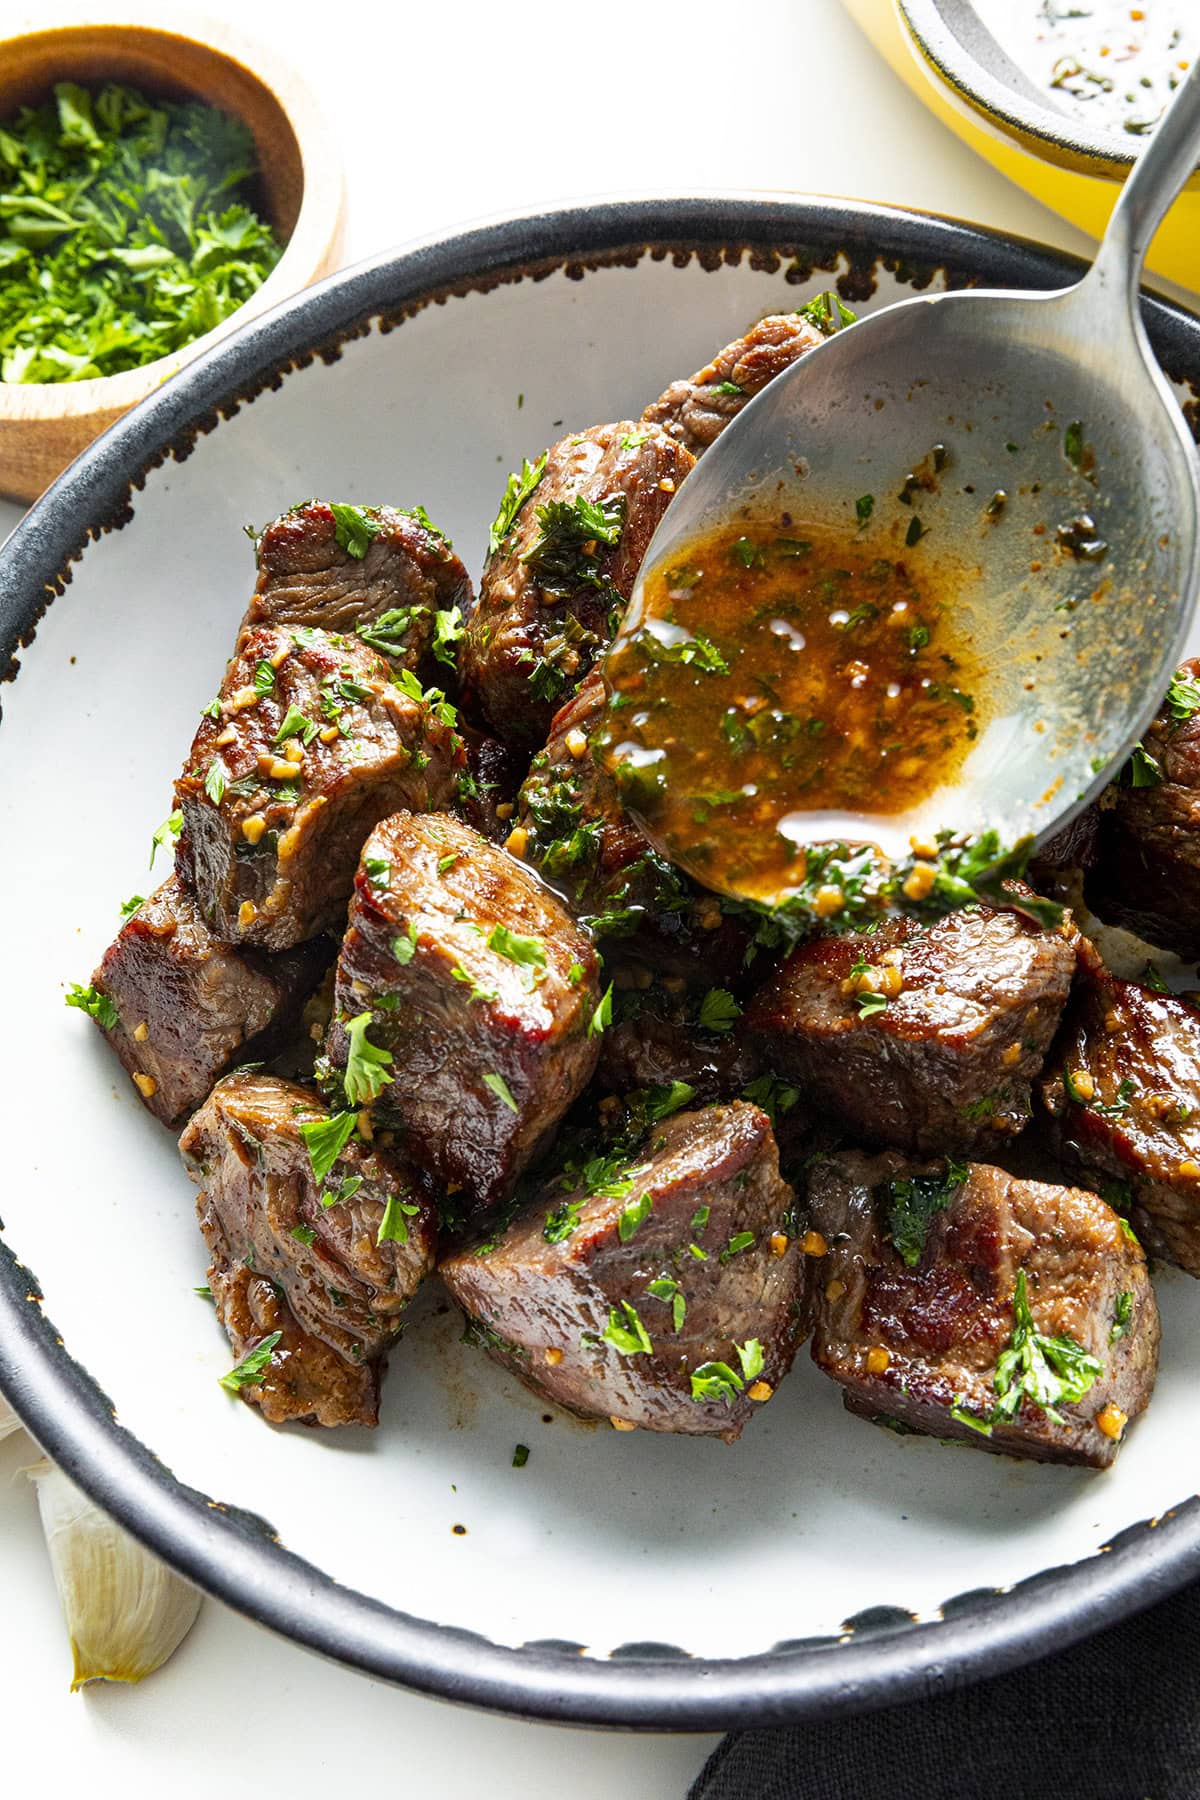 Steak bites in a bowl drizzled with garlic butter sauce.